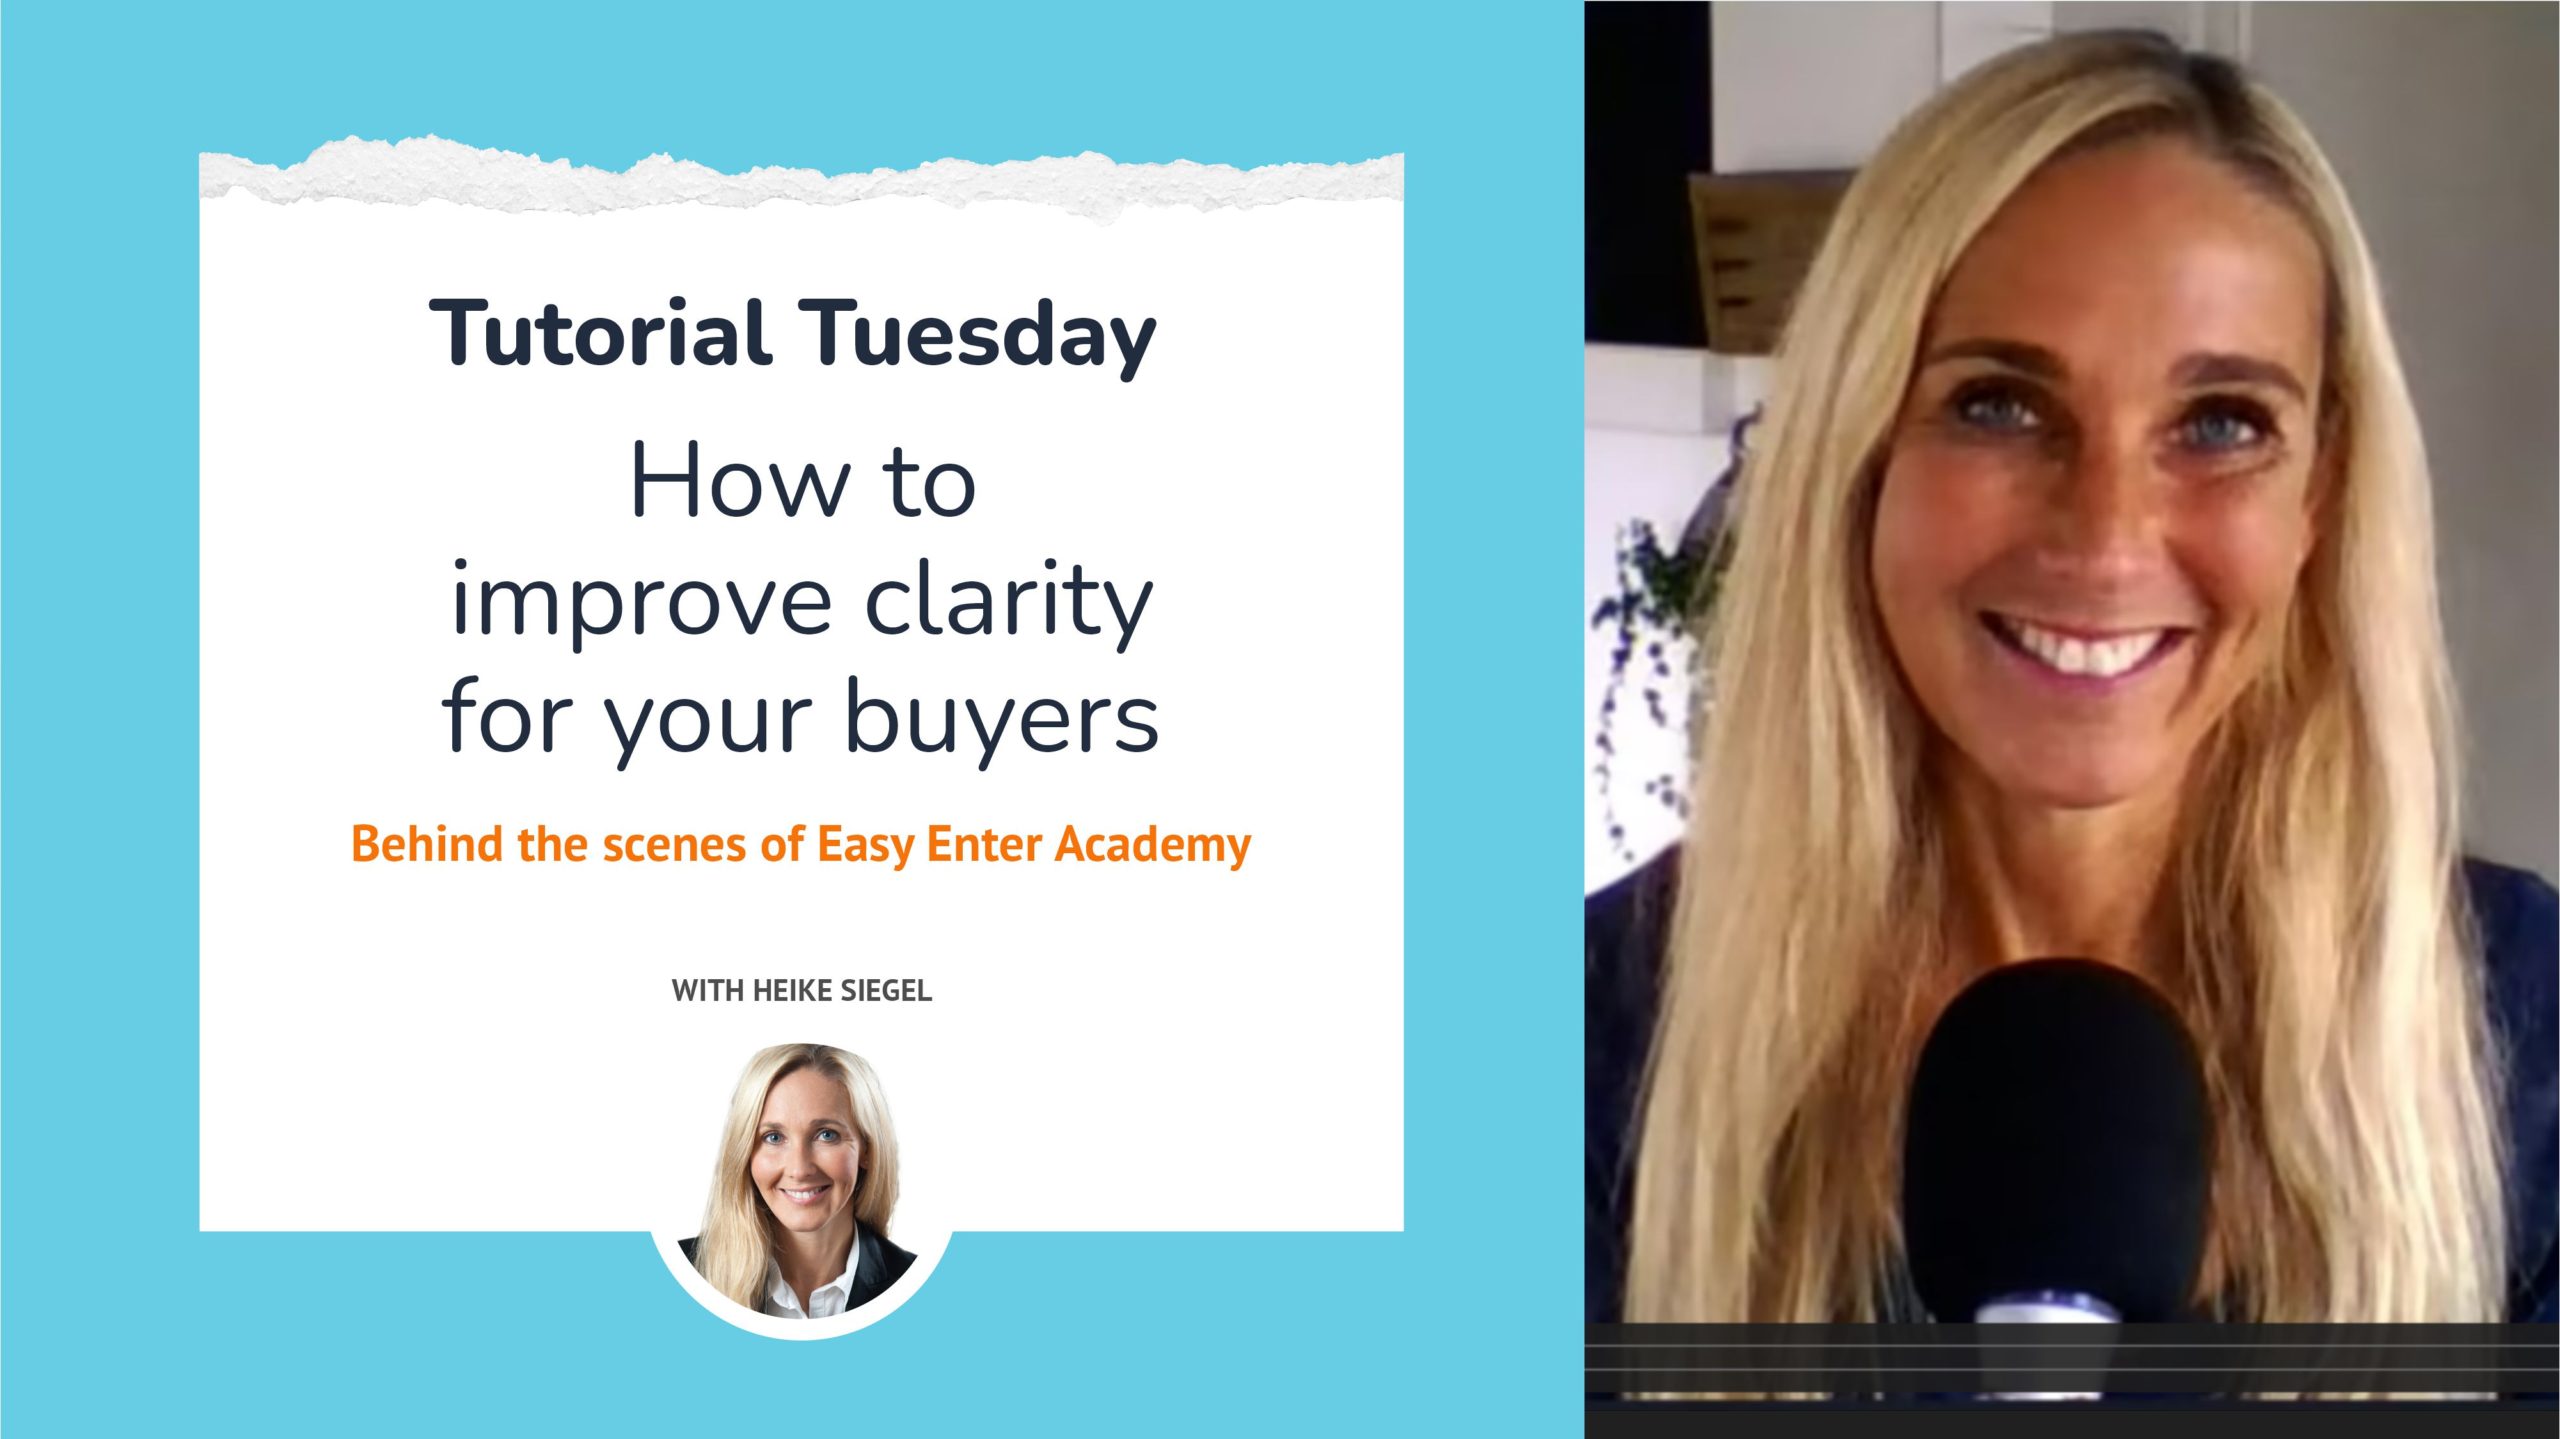 How to improve clarity for your buyers